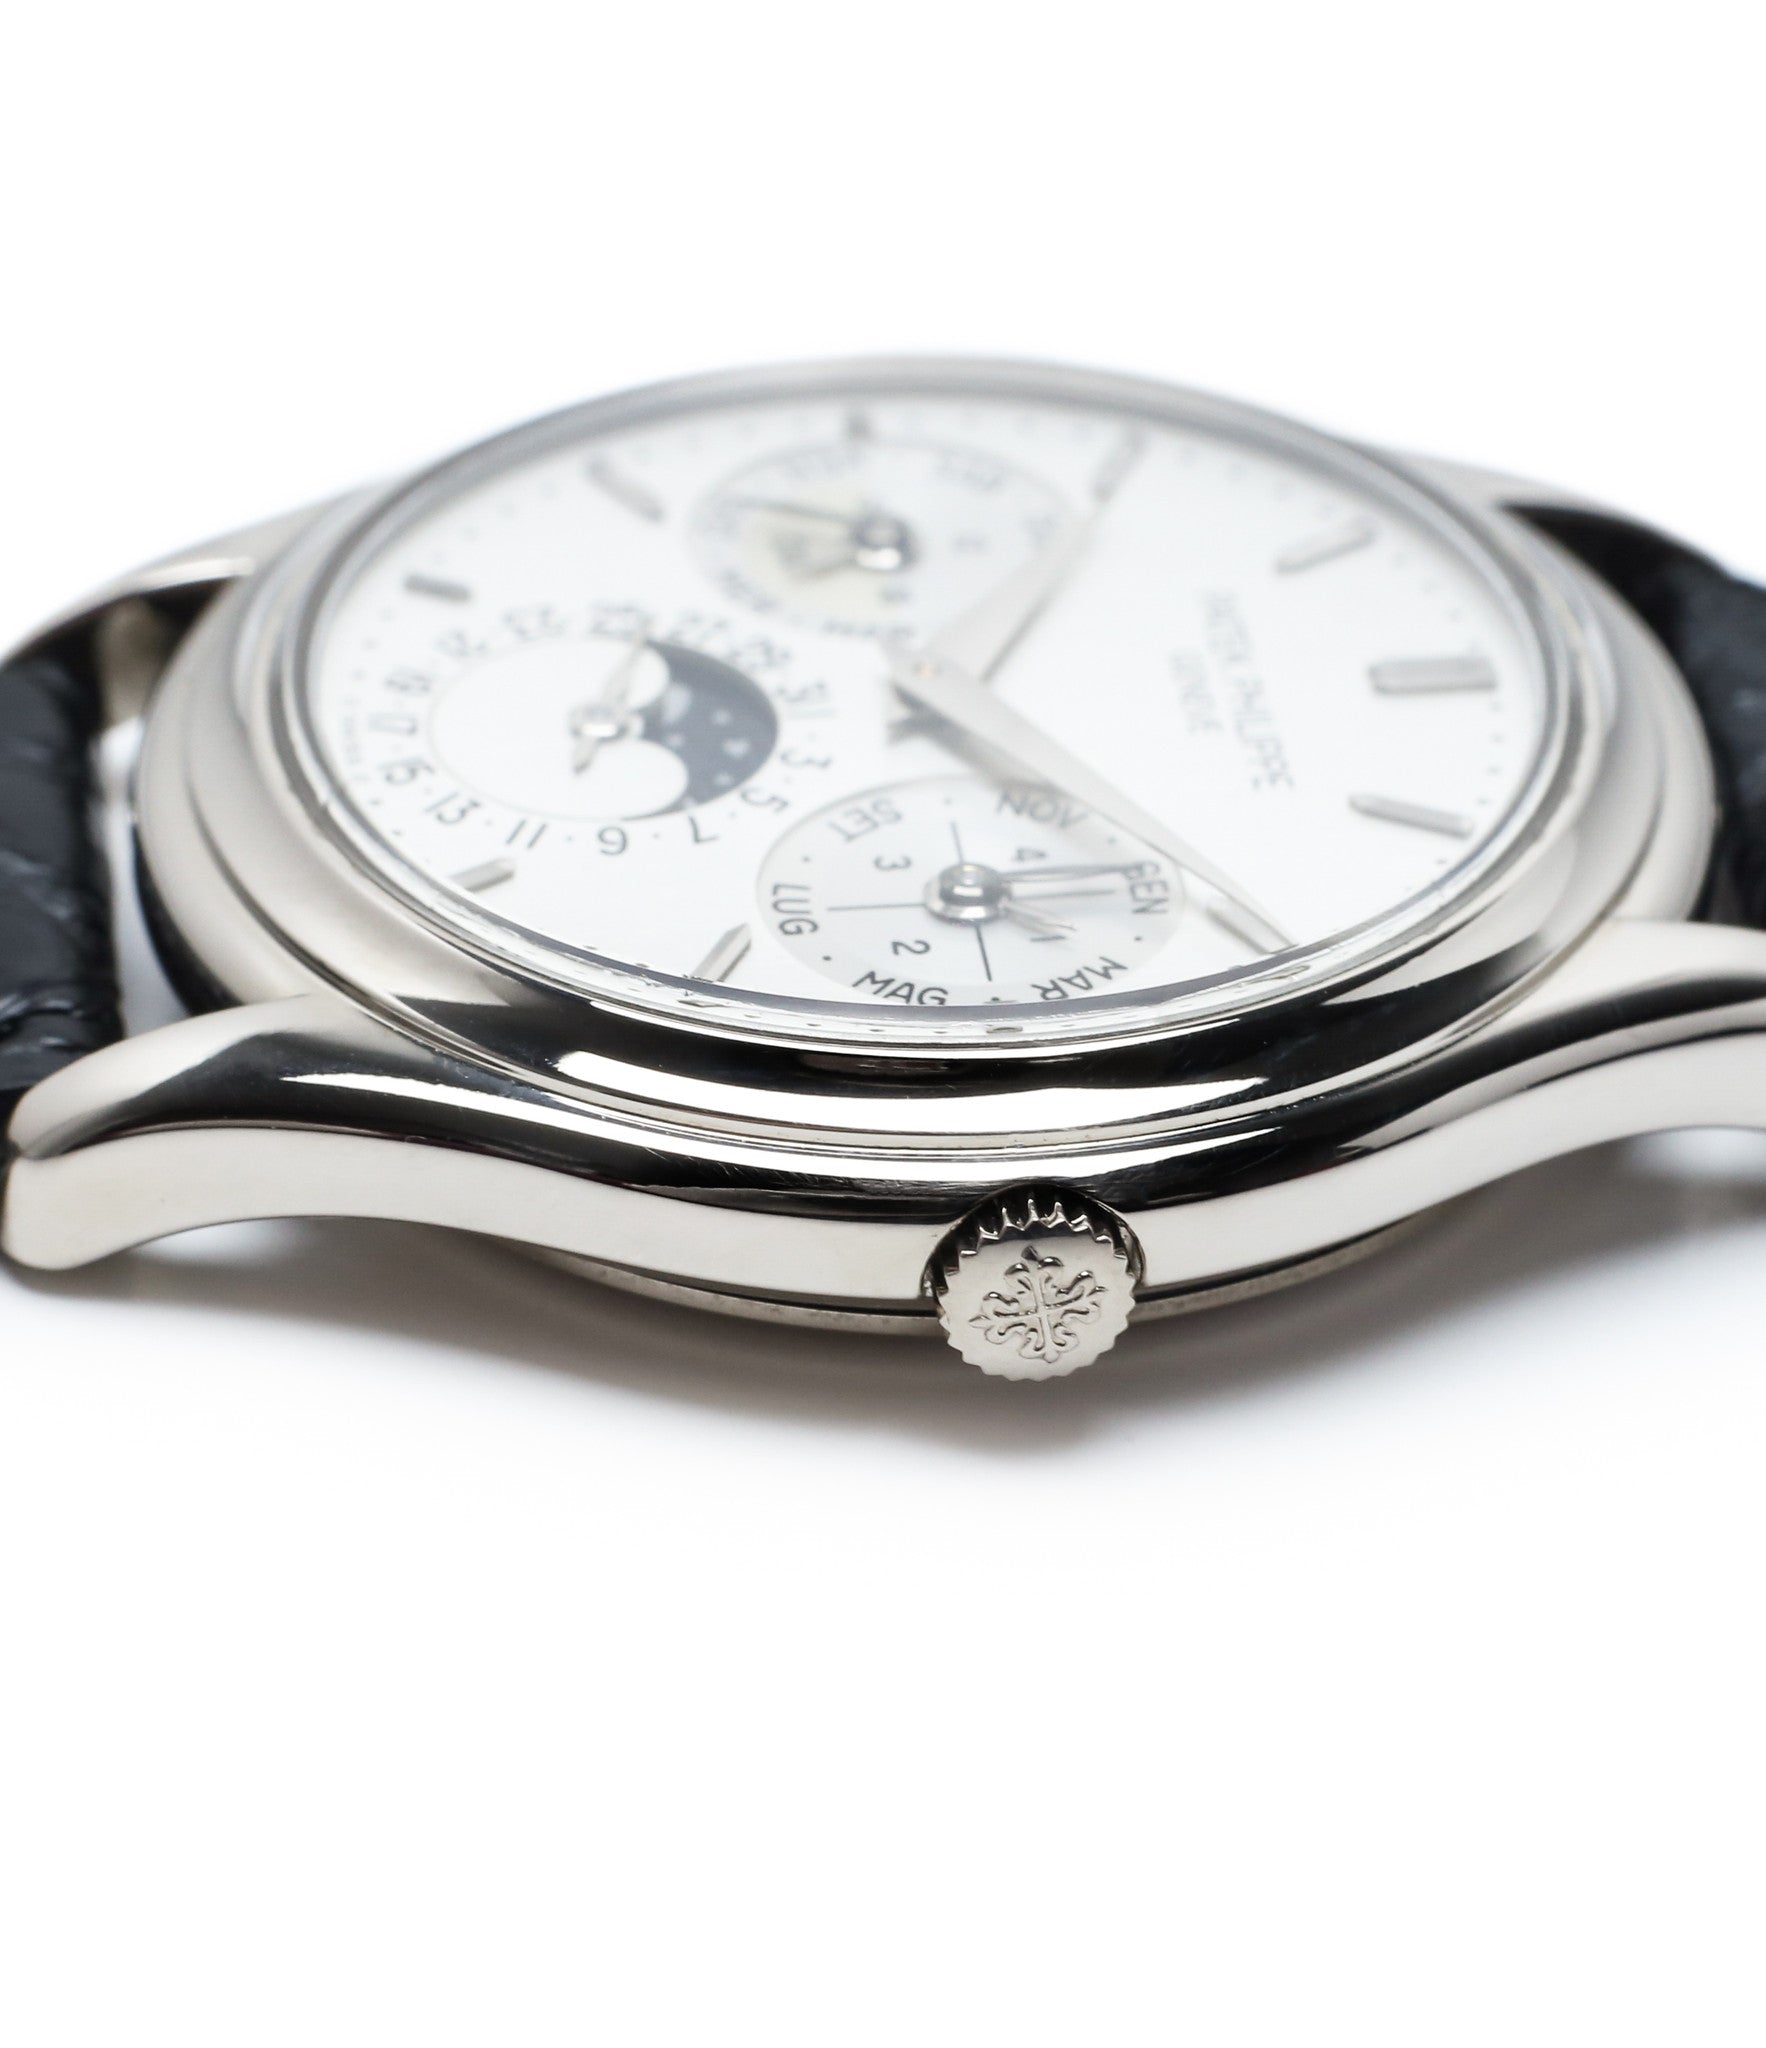 crown slim case buy rare Patek Philippe Perpetual Calendar 3940G moonphase white gold watch full set at A Collected Man